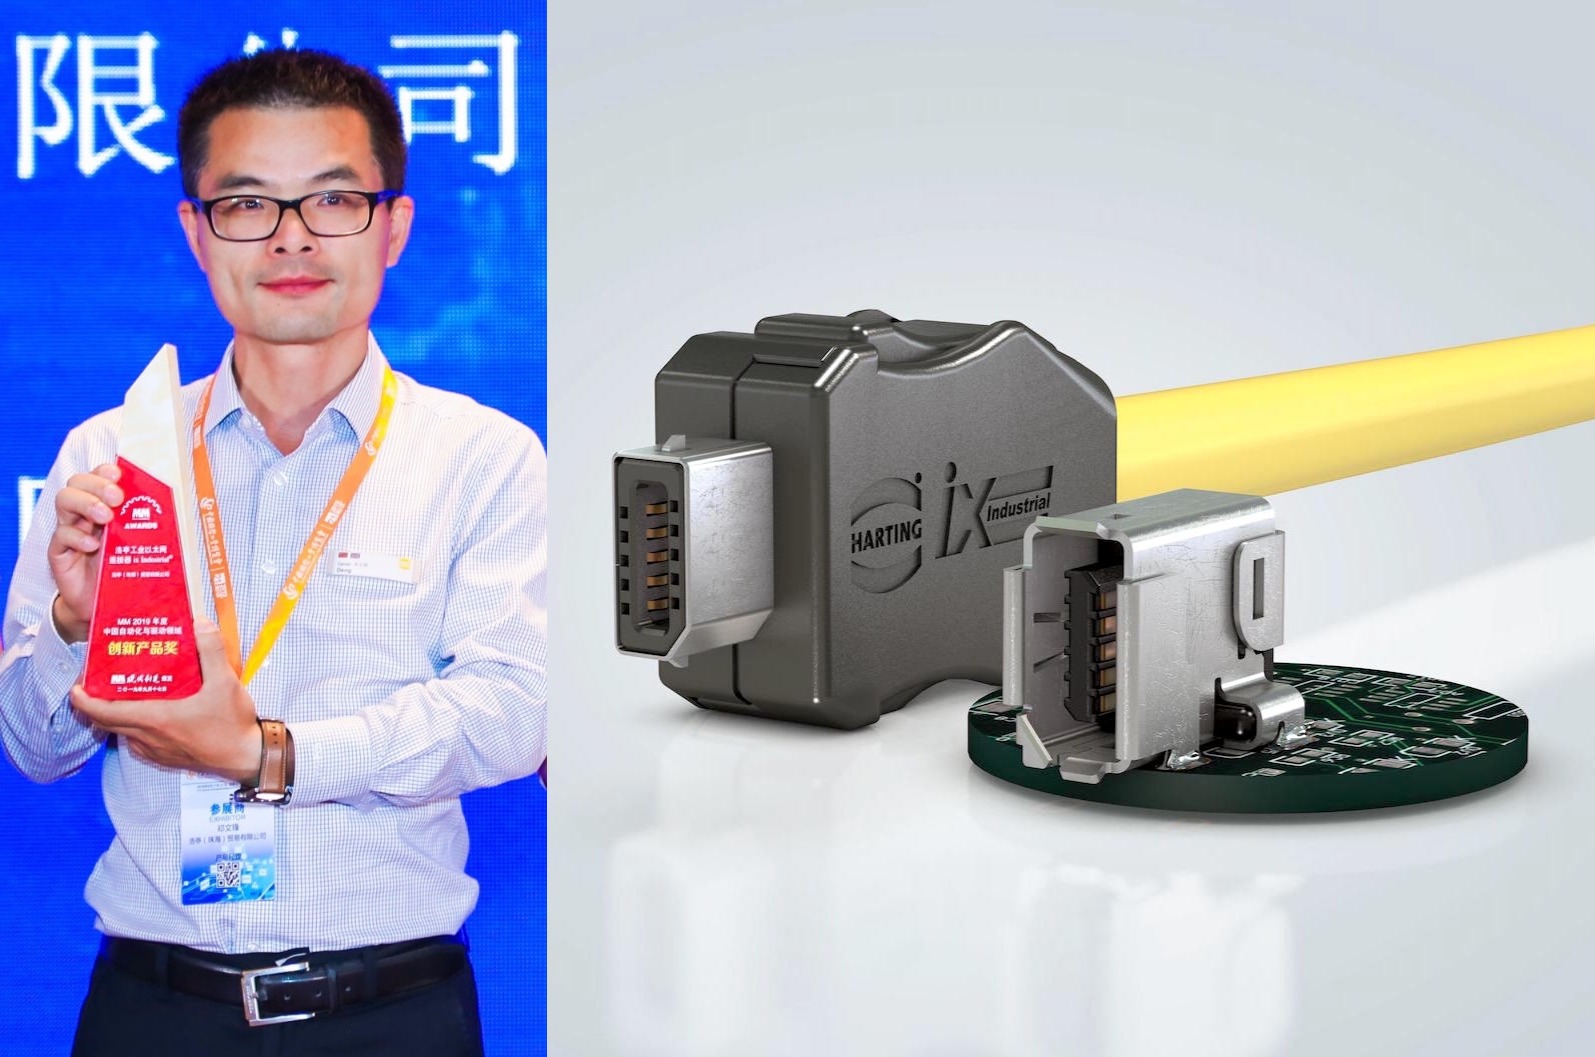 October 2019 Connector Industry News - HARTING's Innovative Product Award for the ix Industrial Ethernet Connector